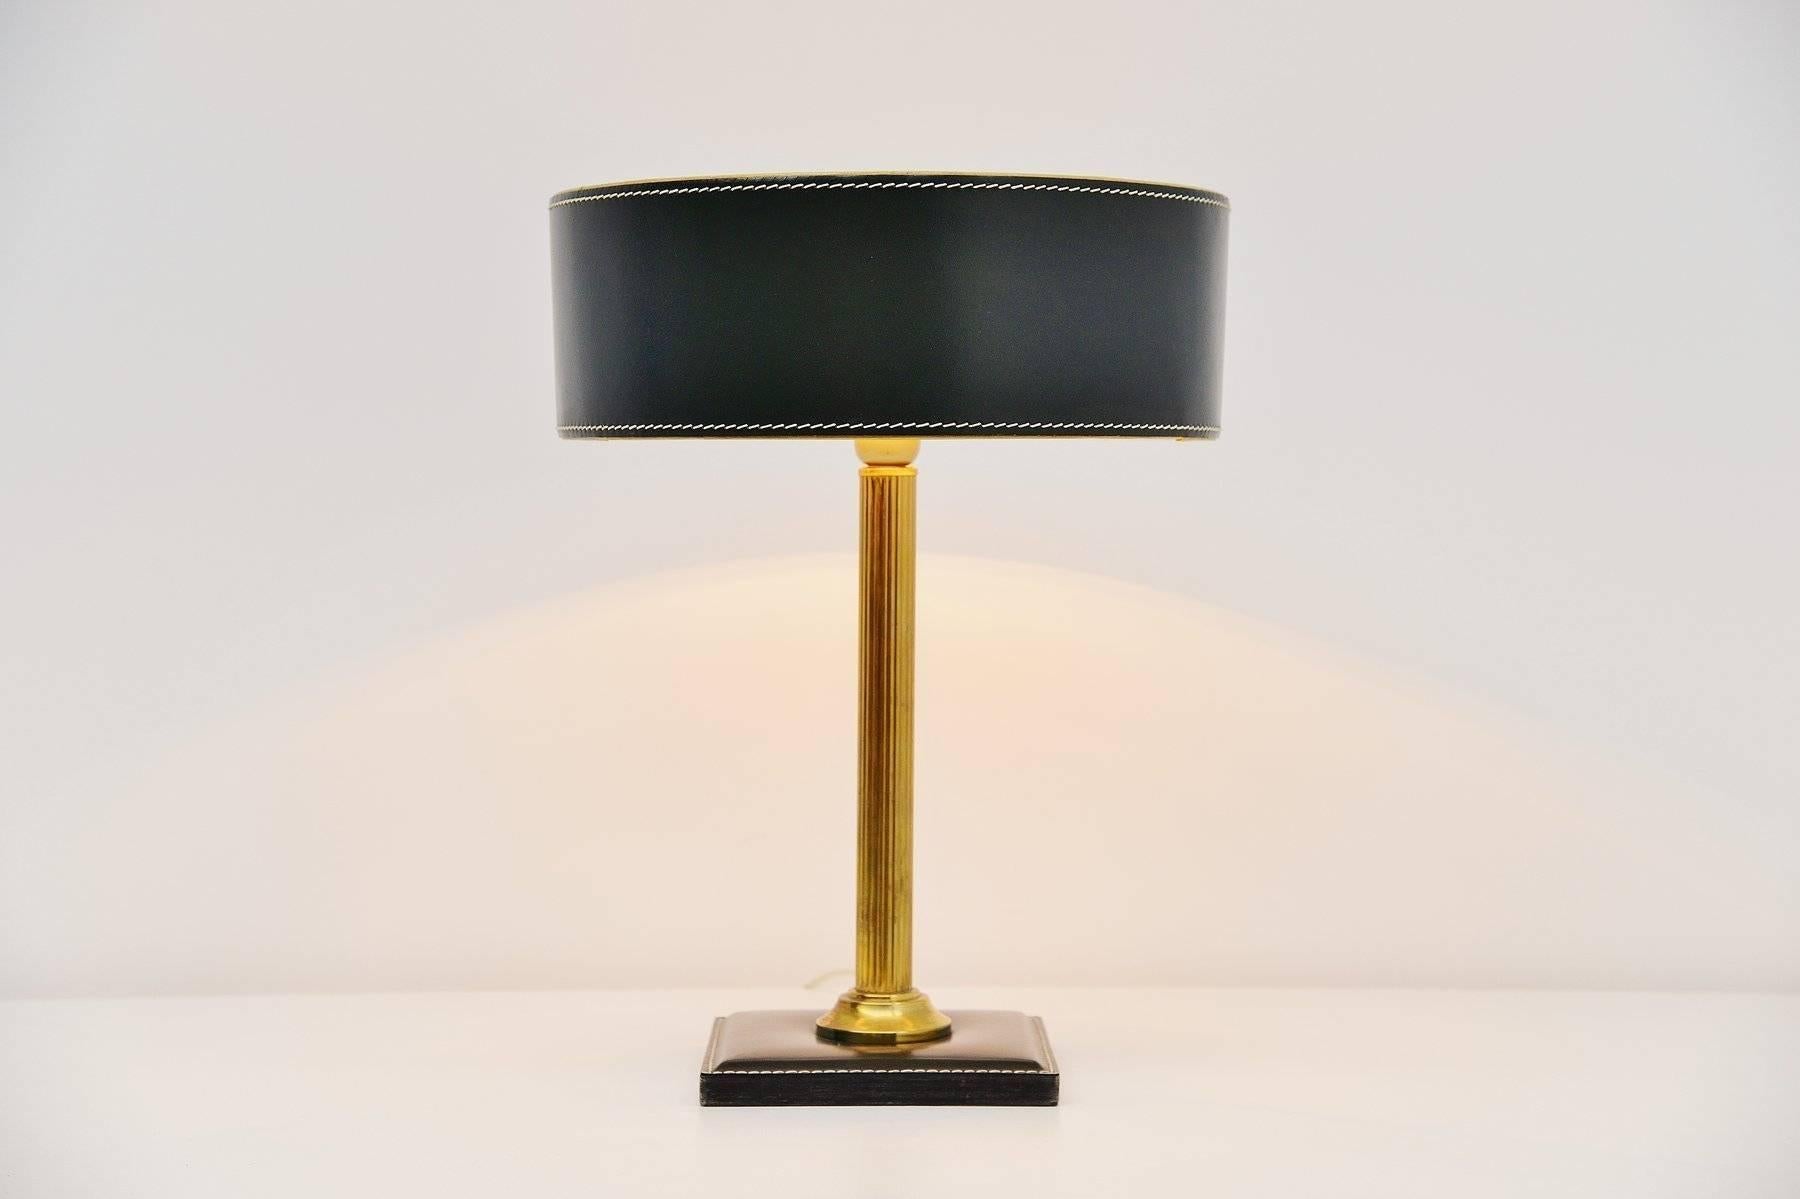 Very nice and highly decorative table lamp designed by Jacques Adnet, France 1960. This leather clad table lamp has a square shade and a brass stem, the shade is made of leather too. High quality stitching on this lamp. The lamp is in dark green